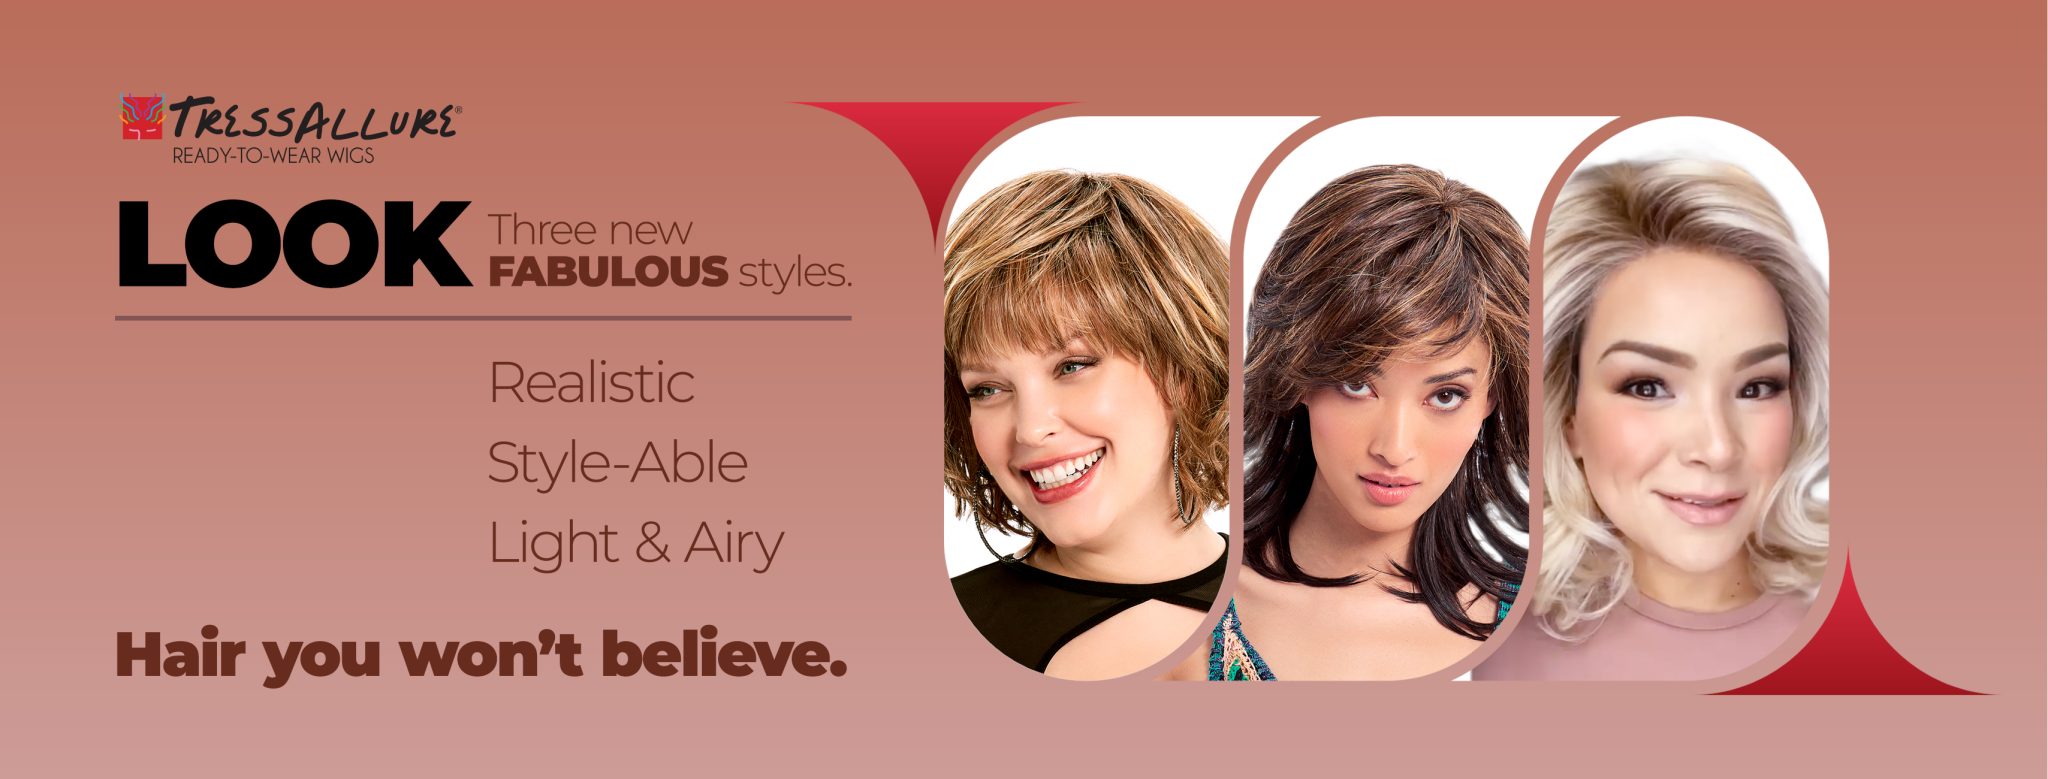 alt tagLOOK Fabulous Wigs from TressAllure® Be bold and glamorous lead a colorful life change the world inspire others